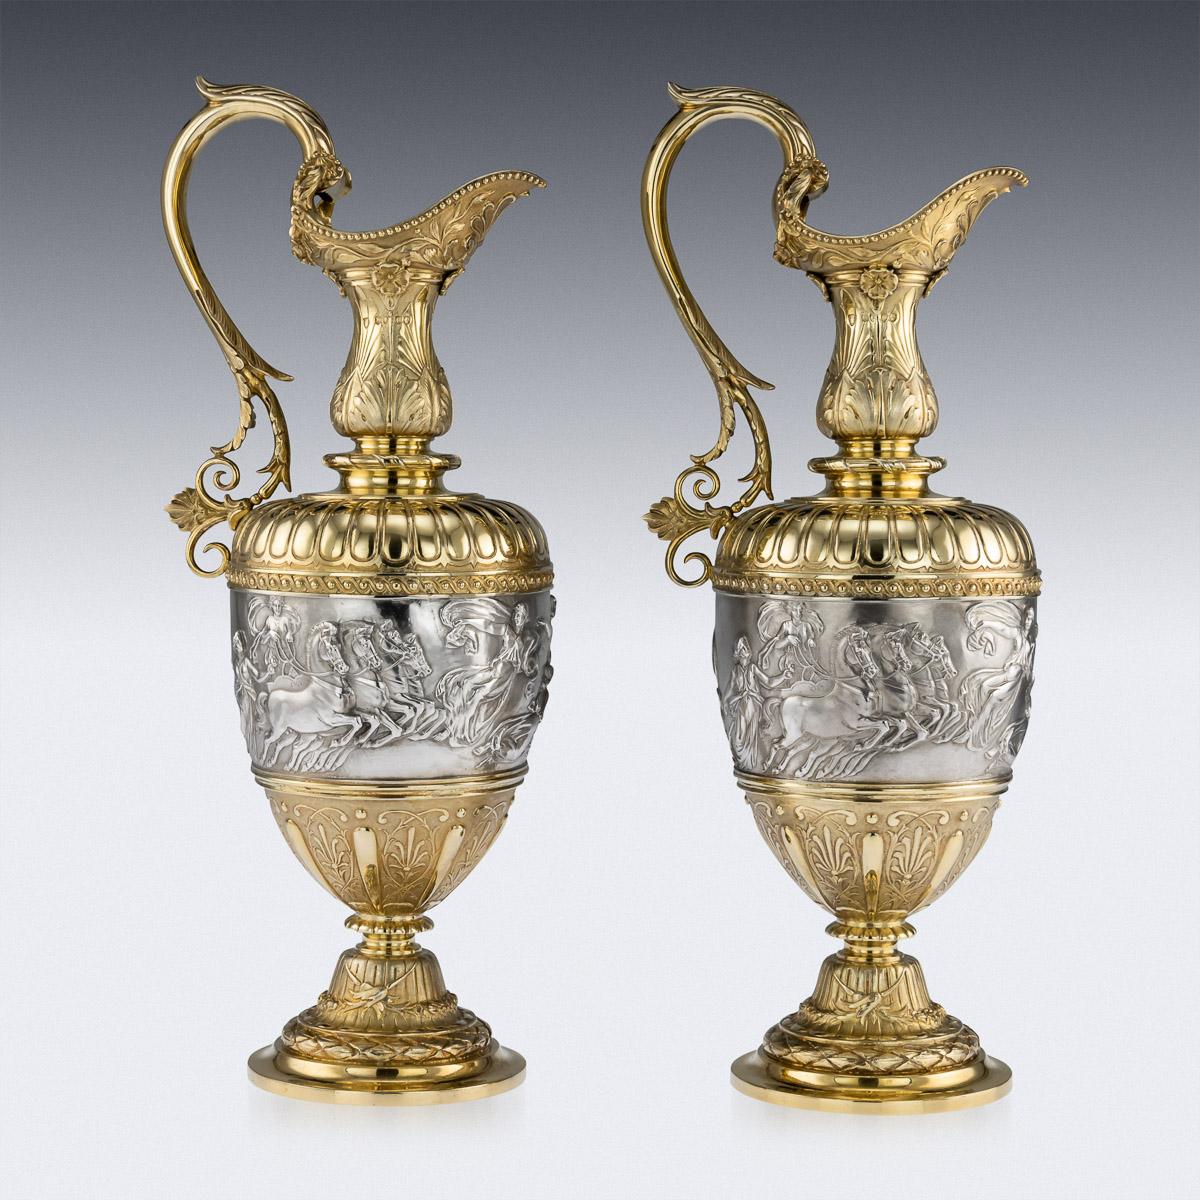 19th Century Victorian Silver-Gilt Pair of Wine Ewers by Elkington & Co, circa 1878